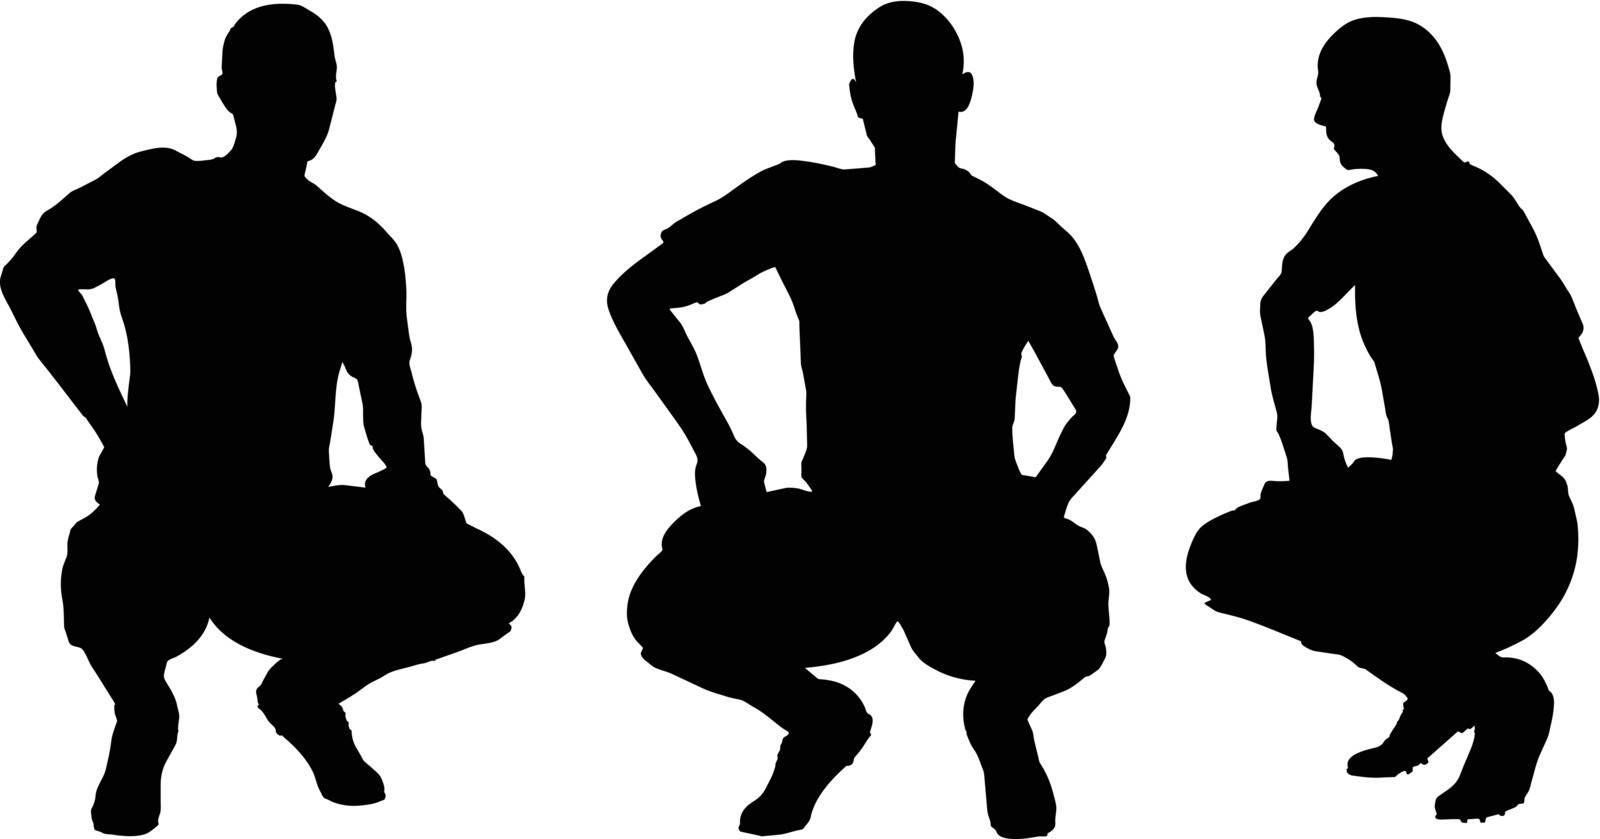 isolated poses of soccer players silhouettes in sitting position